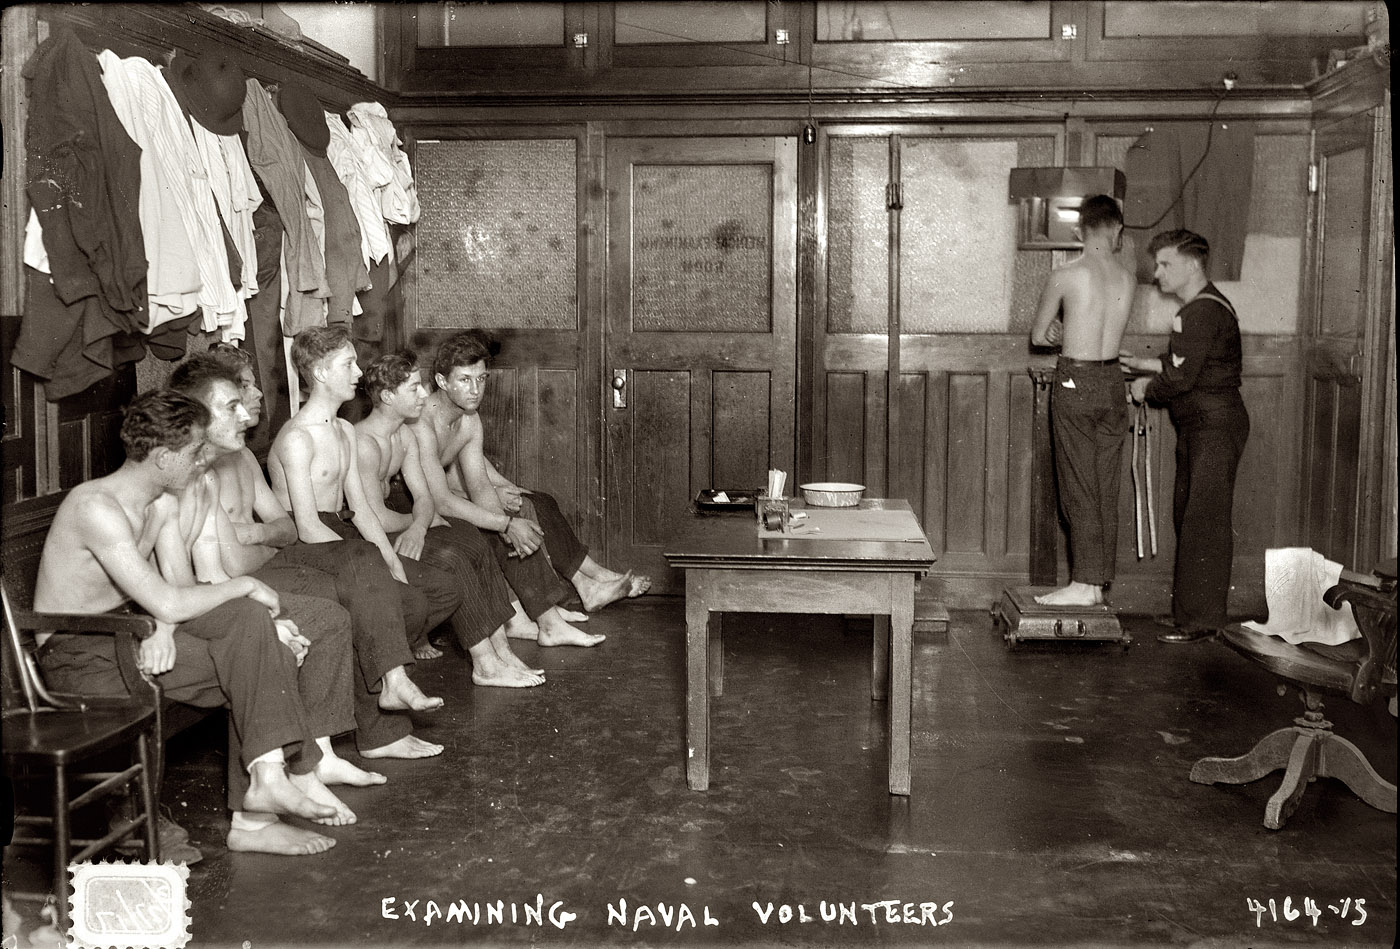 New York. February 27, 1917. "Examining naval volunteers." View full size. 5x7 glass negative, George Grantham Bain Collection. Library of Congress.